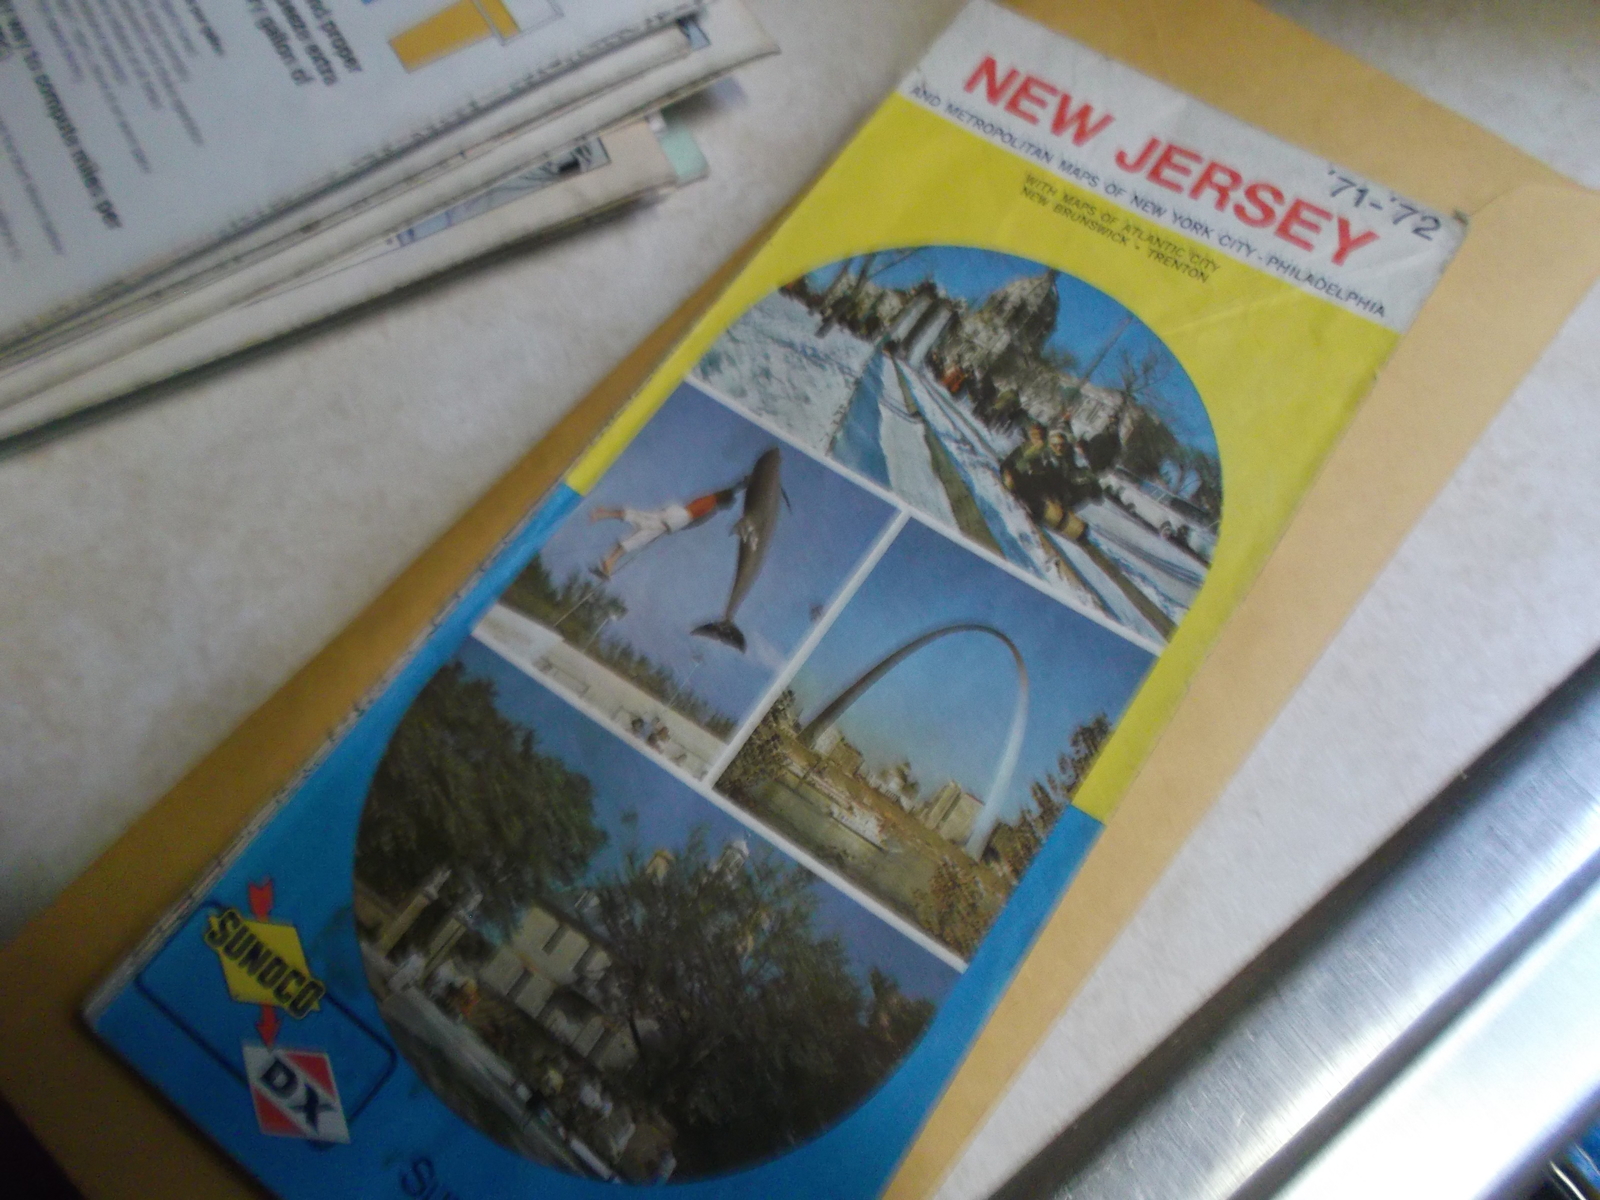 Original 1971-1972 Sunoco/DX New Jersey Road Map with Metropolitan NY - £3.91 GBP